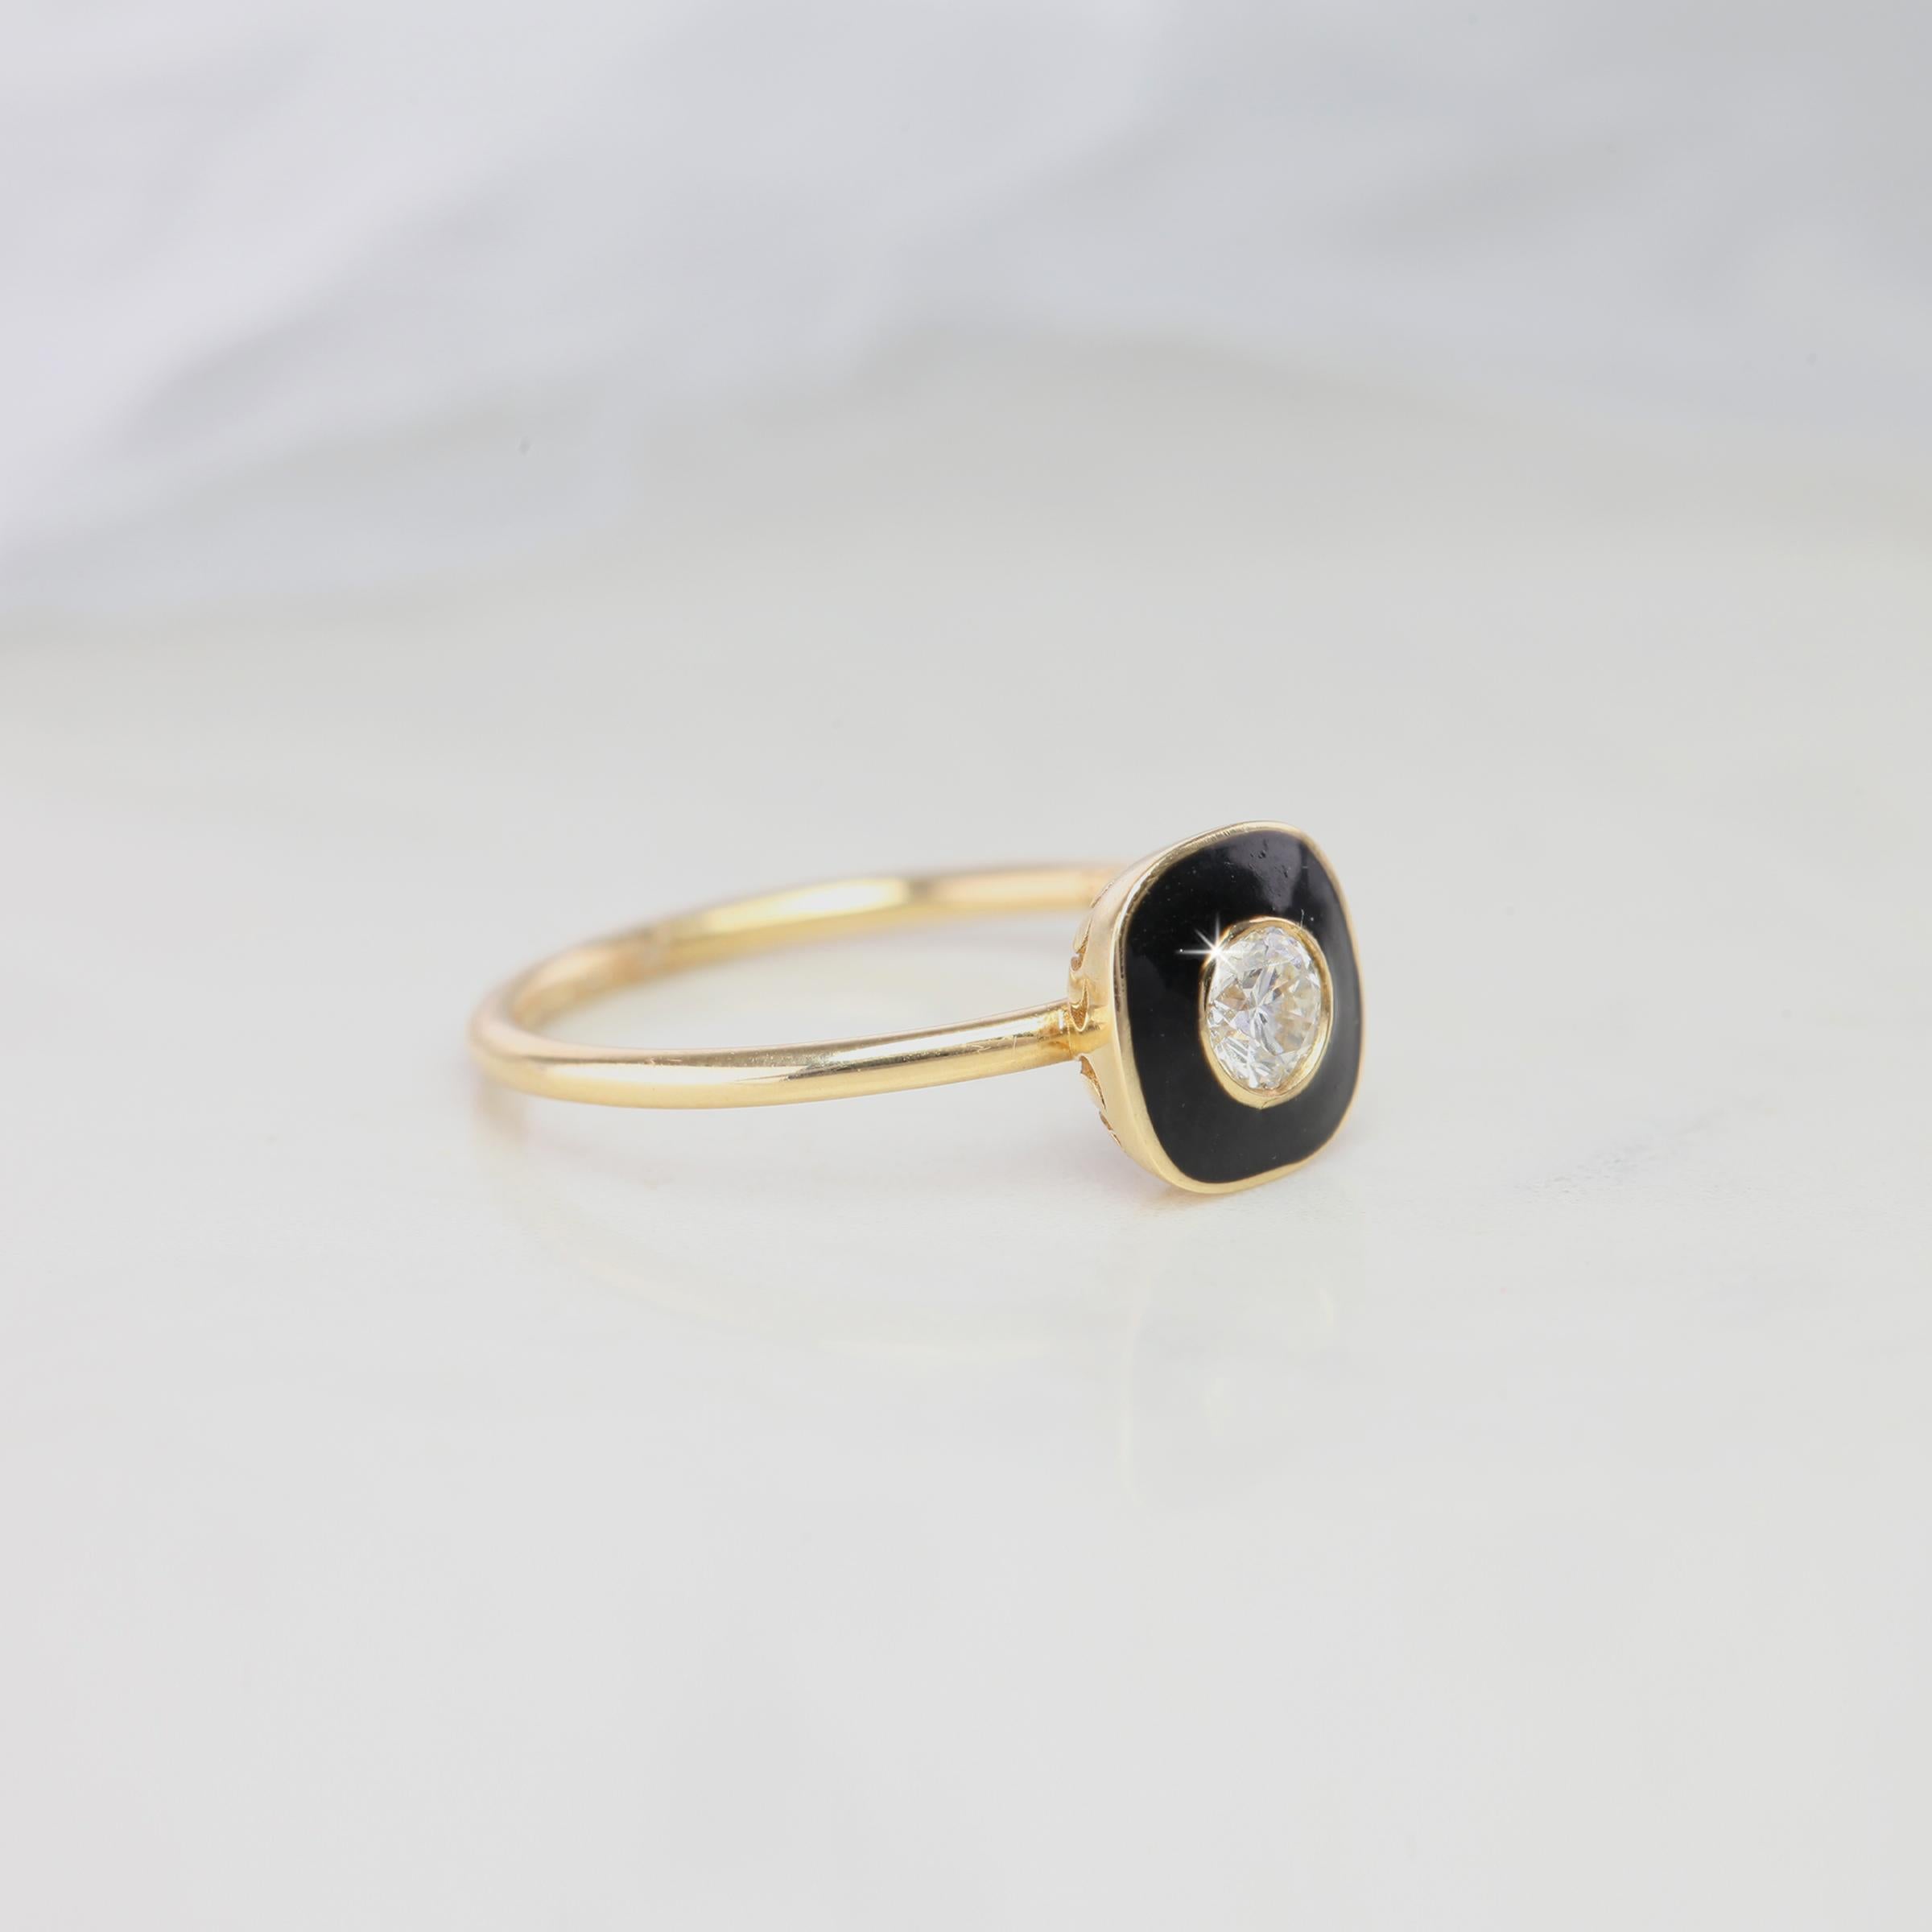 Art Deco Style Black Enameled Diomand Ring Artdeco Style Black Enameled 0.25 Carat Dainty Stackable Ring Statement Ring Gift for Her created by hands from ring to the stone shapes.

I used brillant artdeco style black enameled to reveal a round